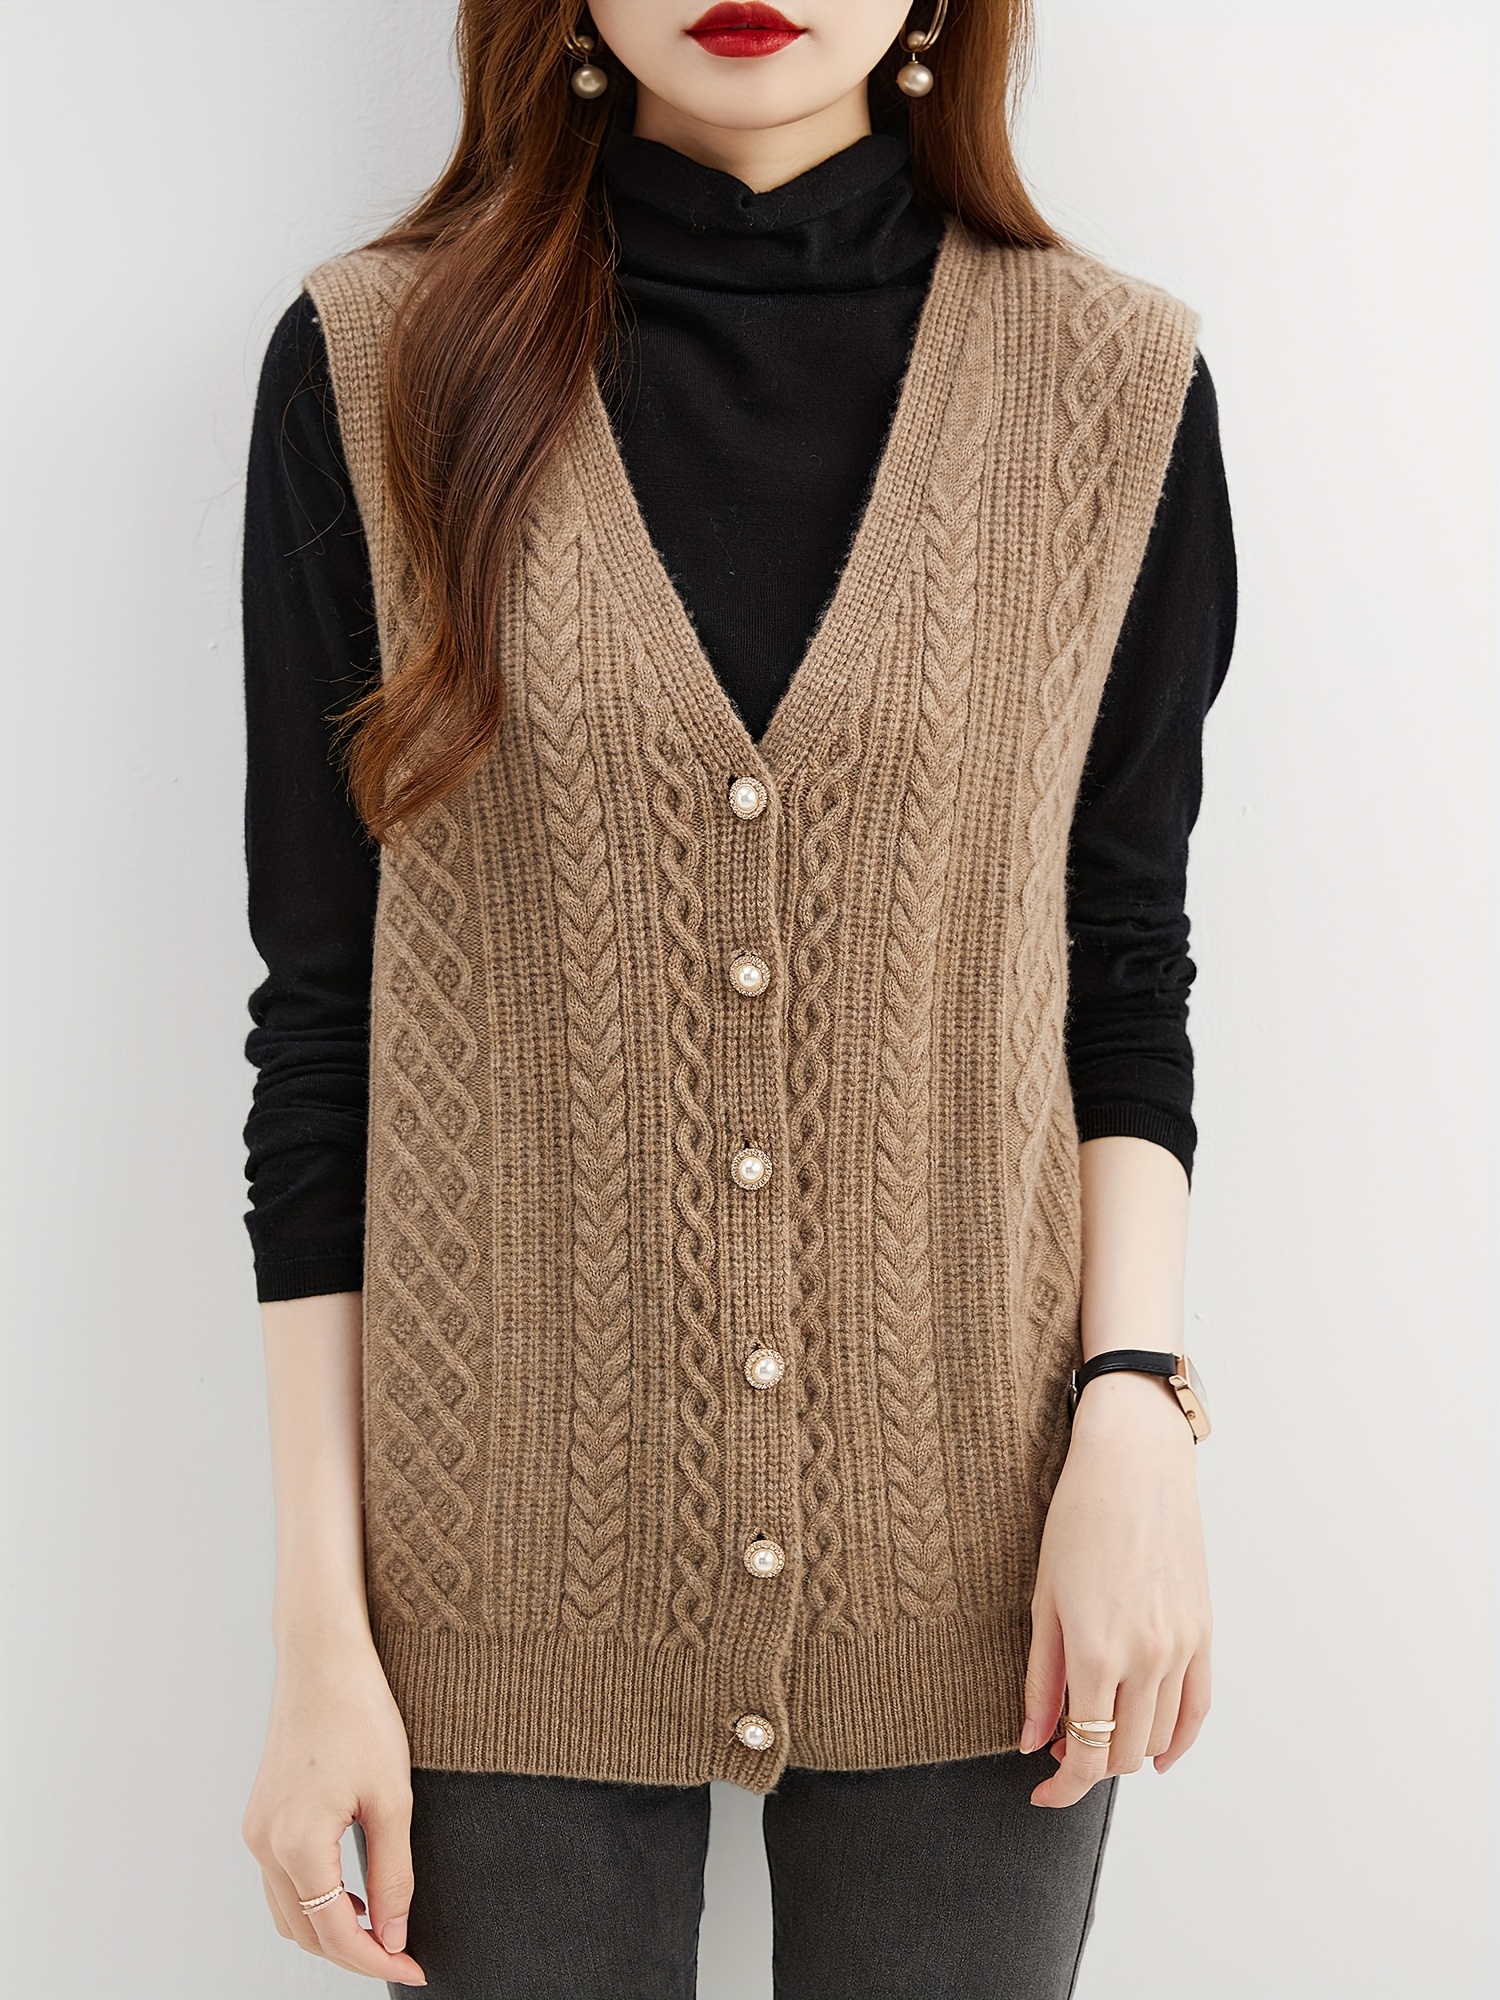 Womens Cable Knitted Vest Ladies Sleeveless High Neck Jumper